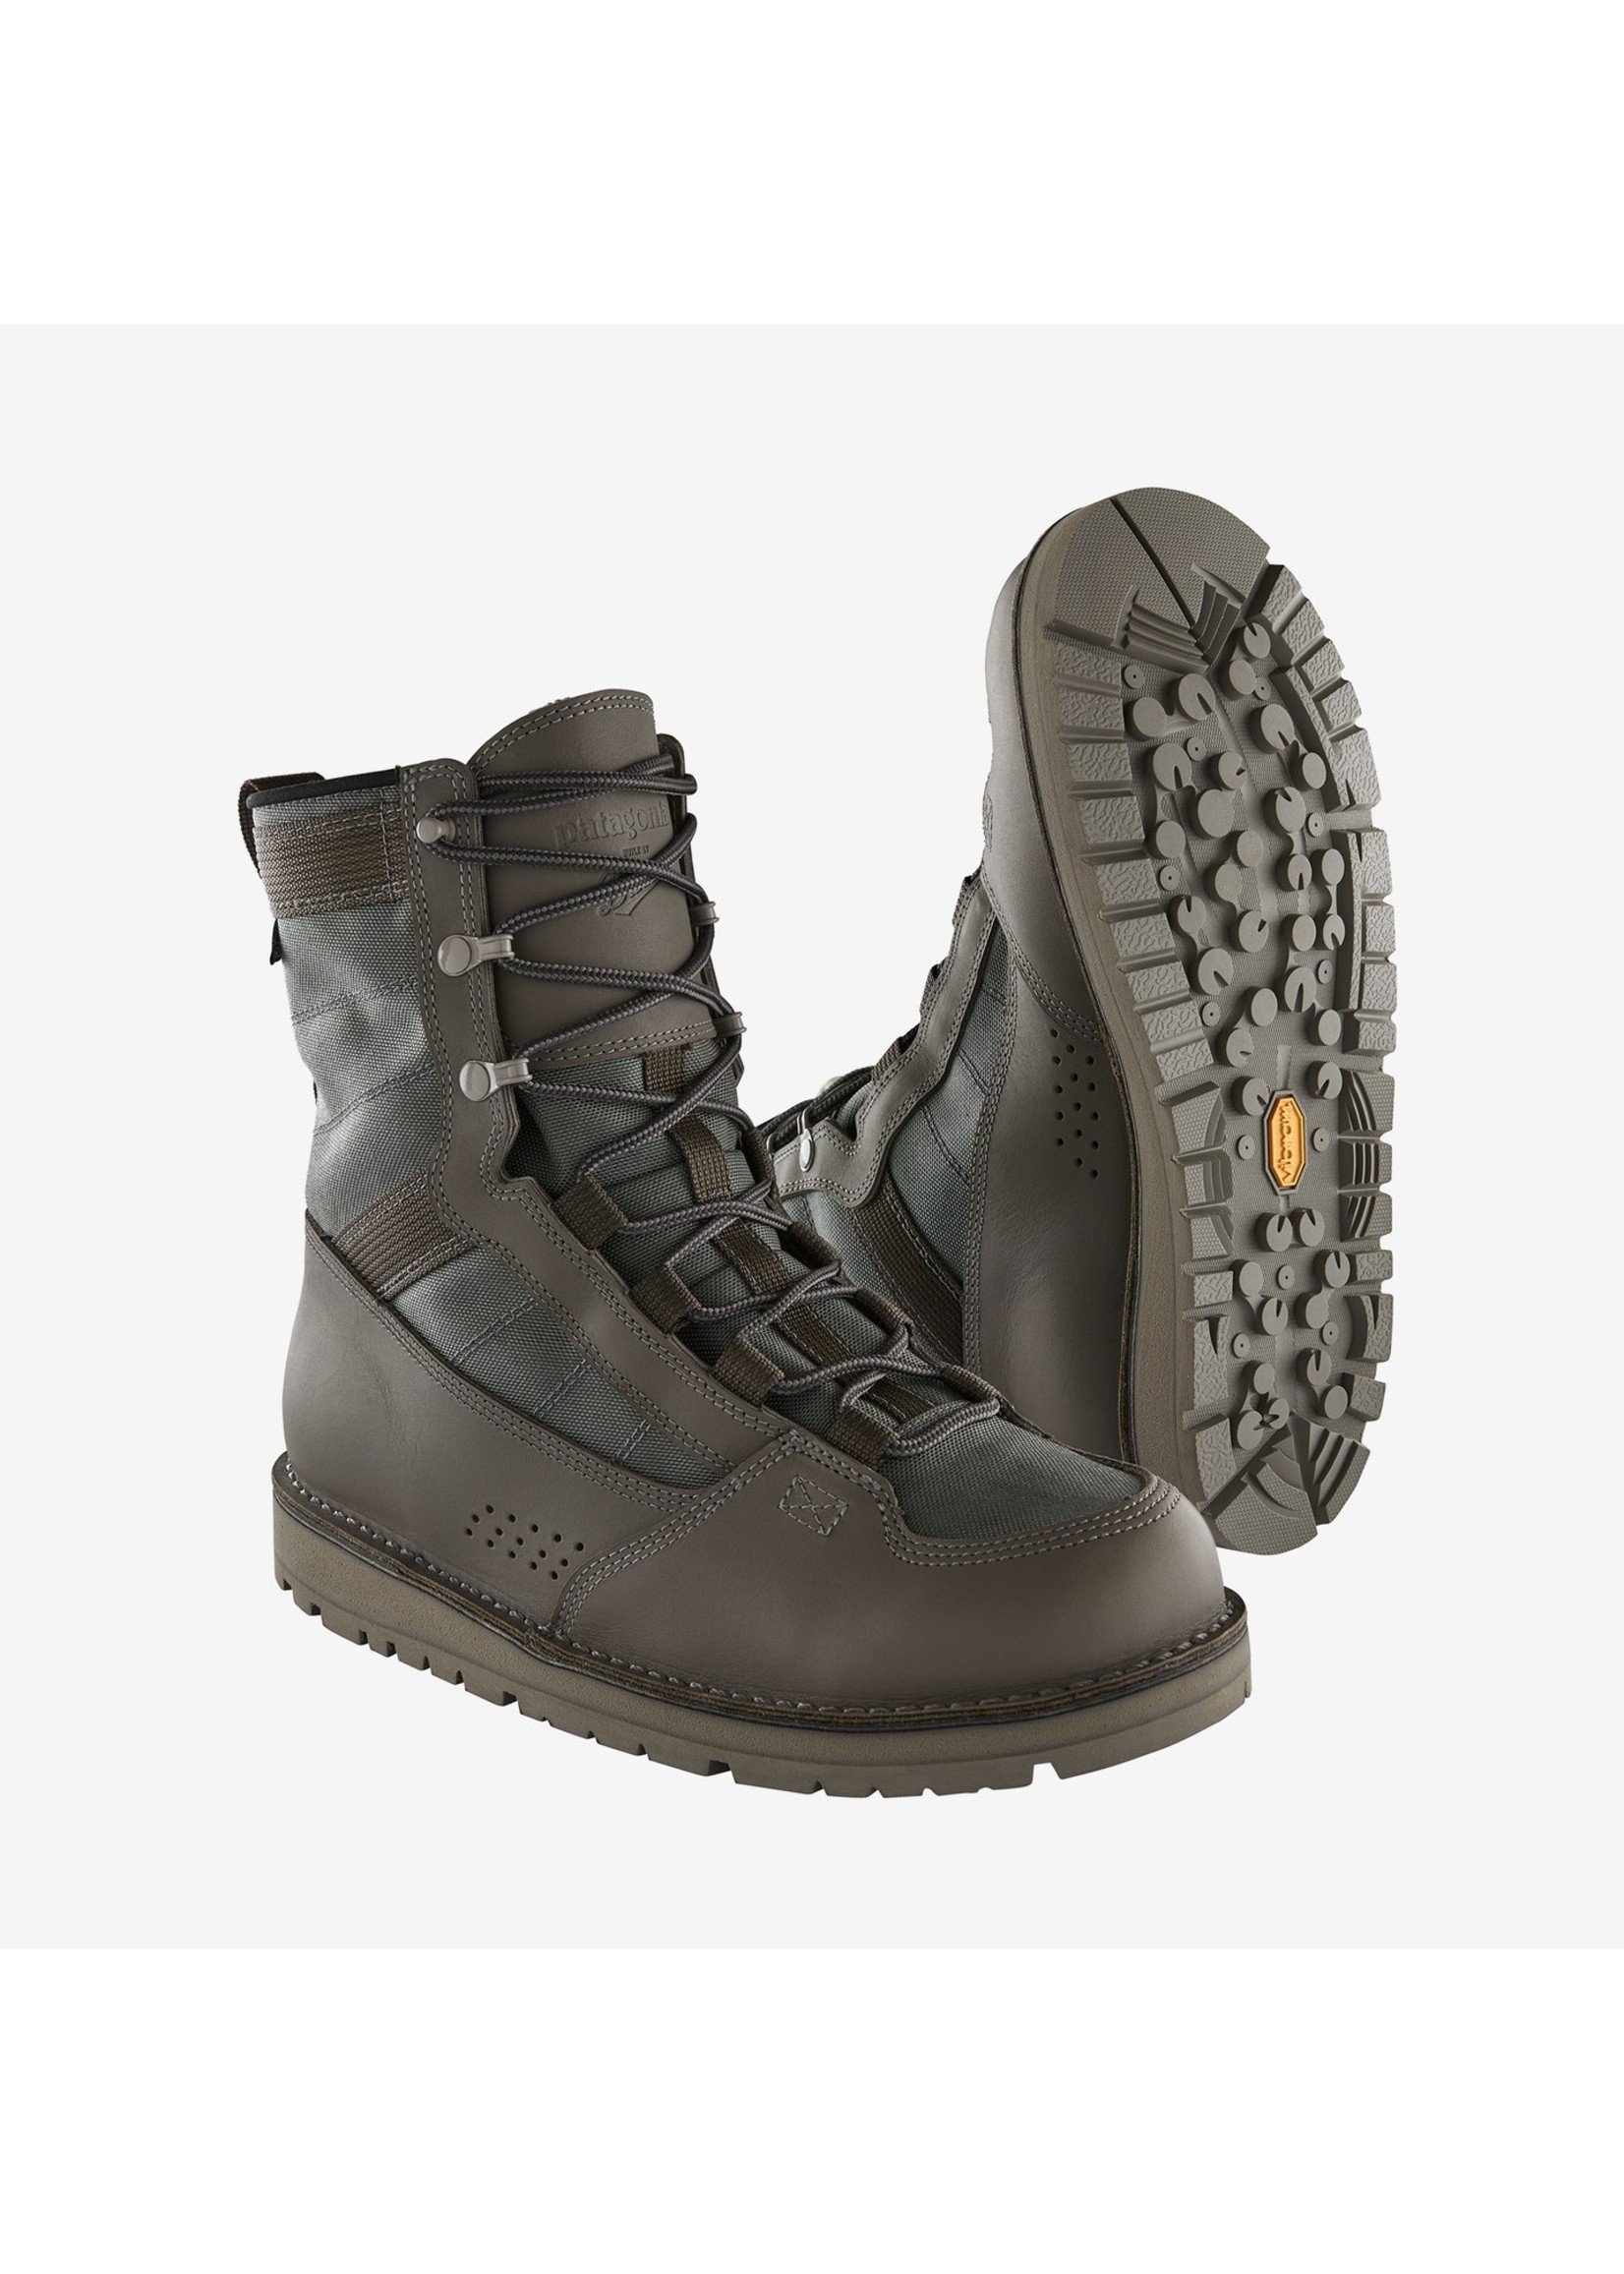 PATAGONIA RIVER SALT WADING BOOTS RUBBER